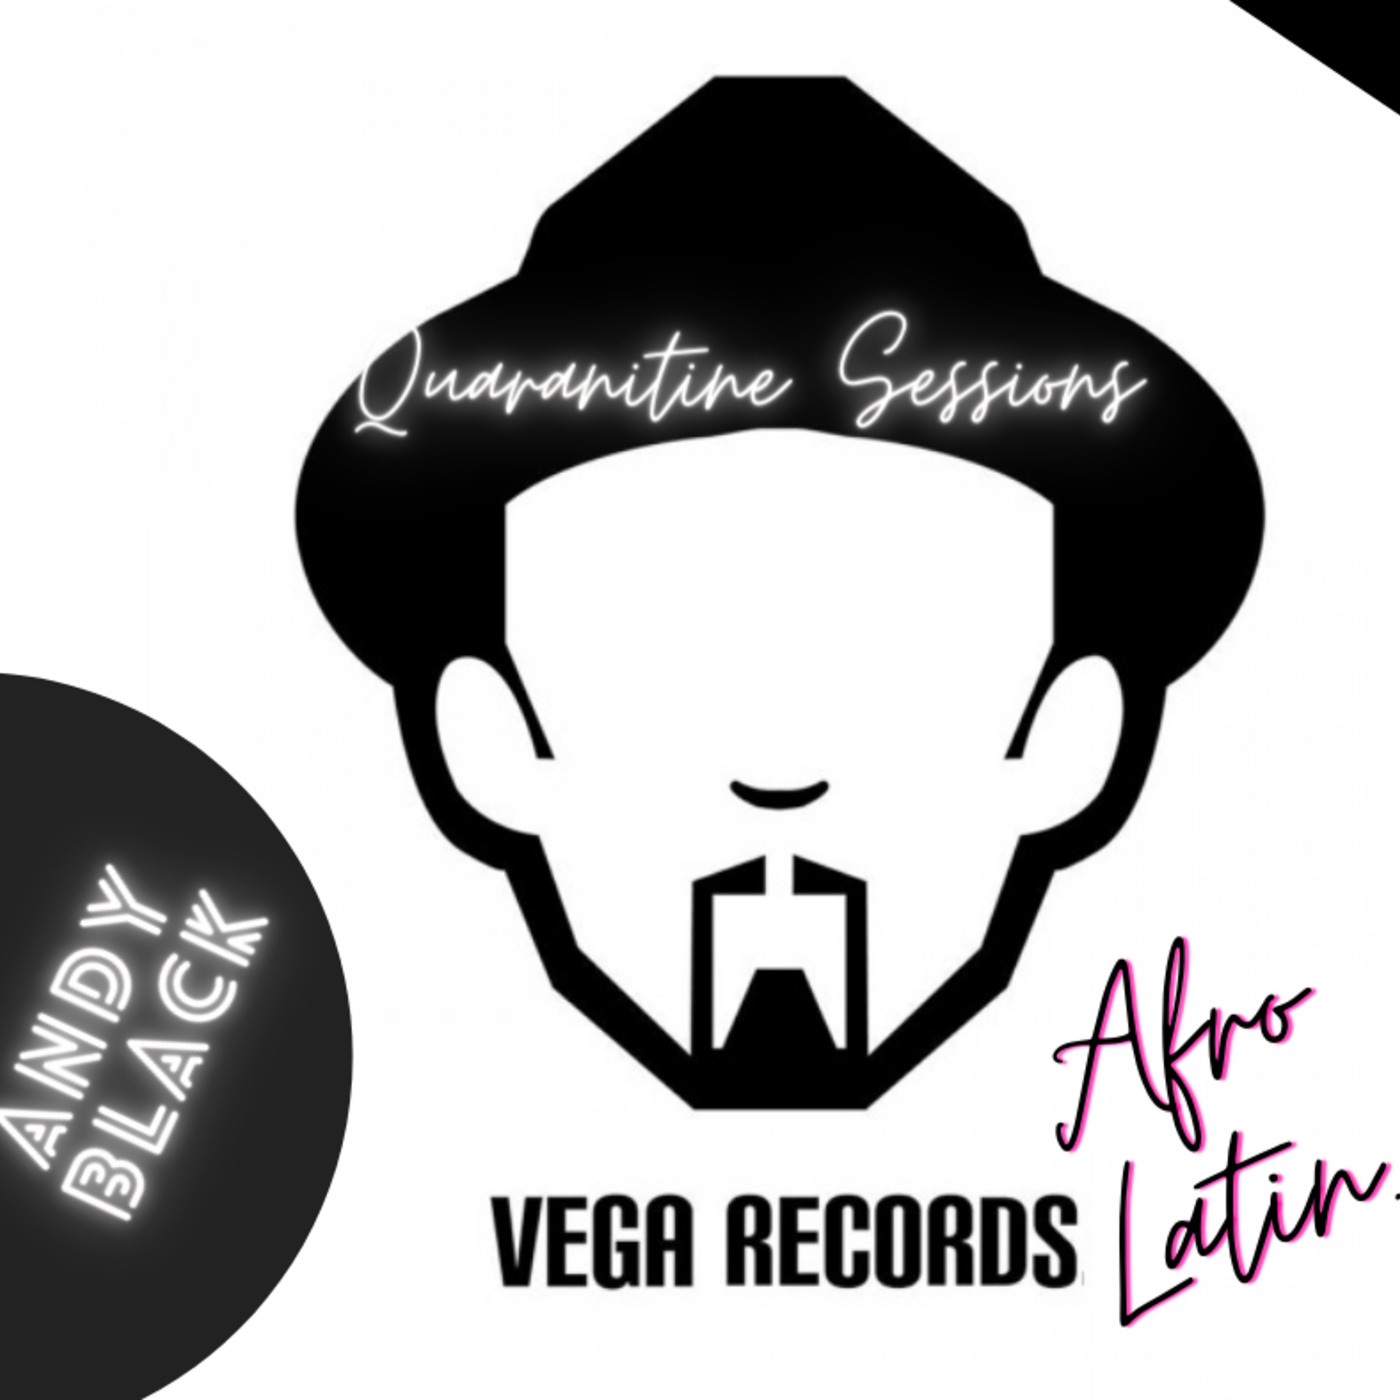 Andy Black #QuarantineSessions - Latin House House (Tribute to Vega Record - Ritual Edition) Episode 67